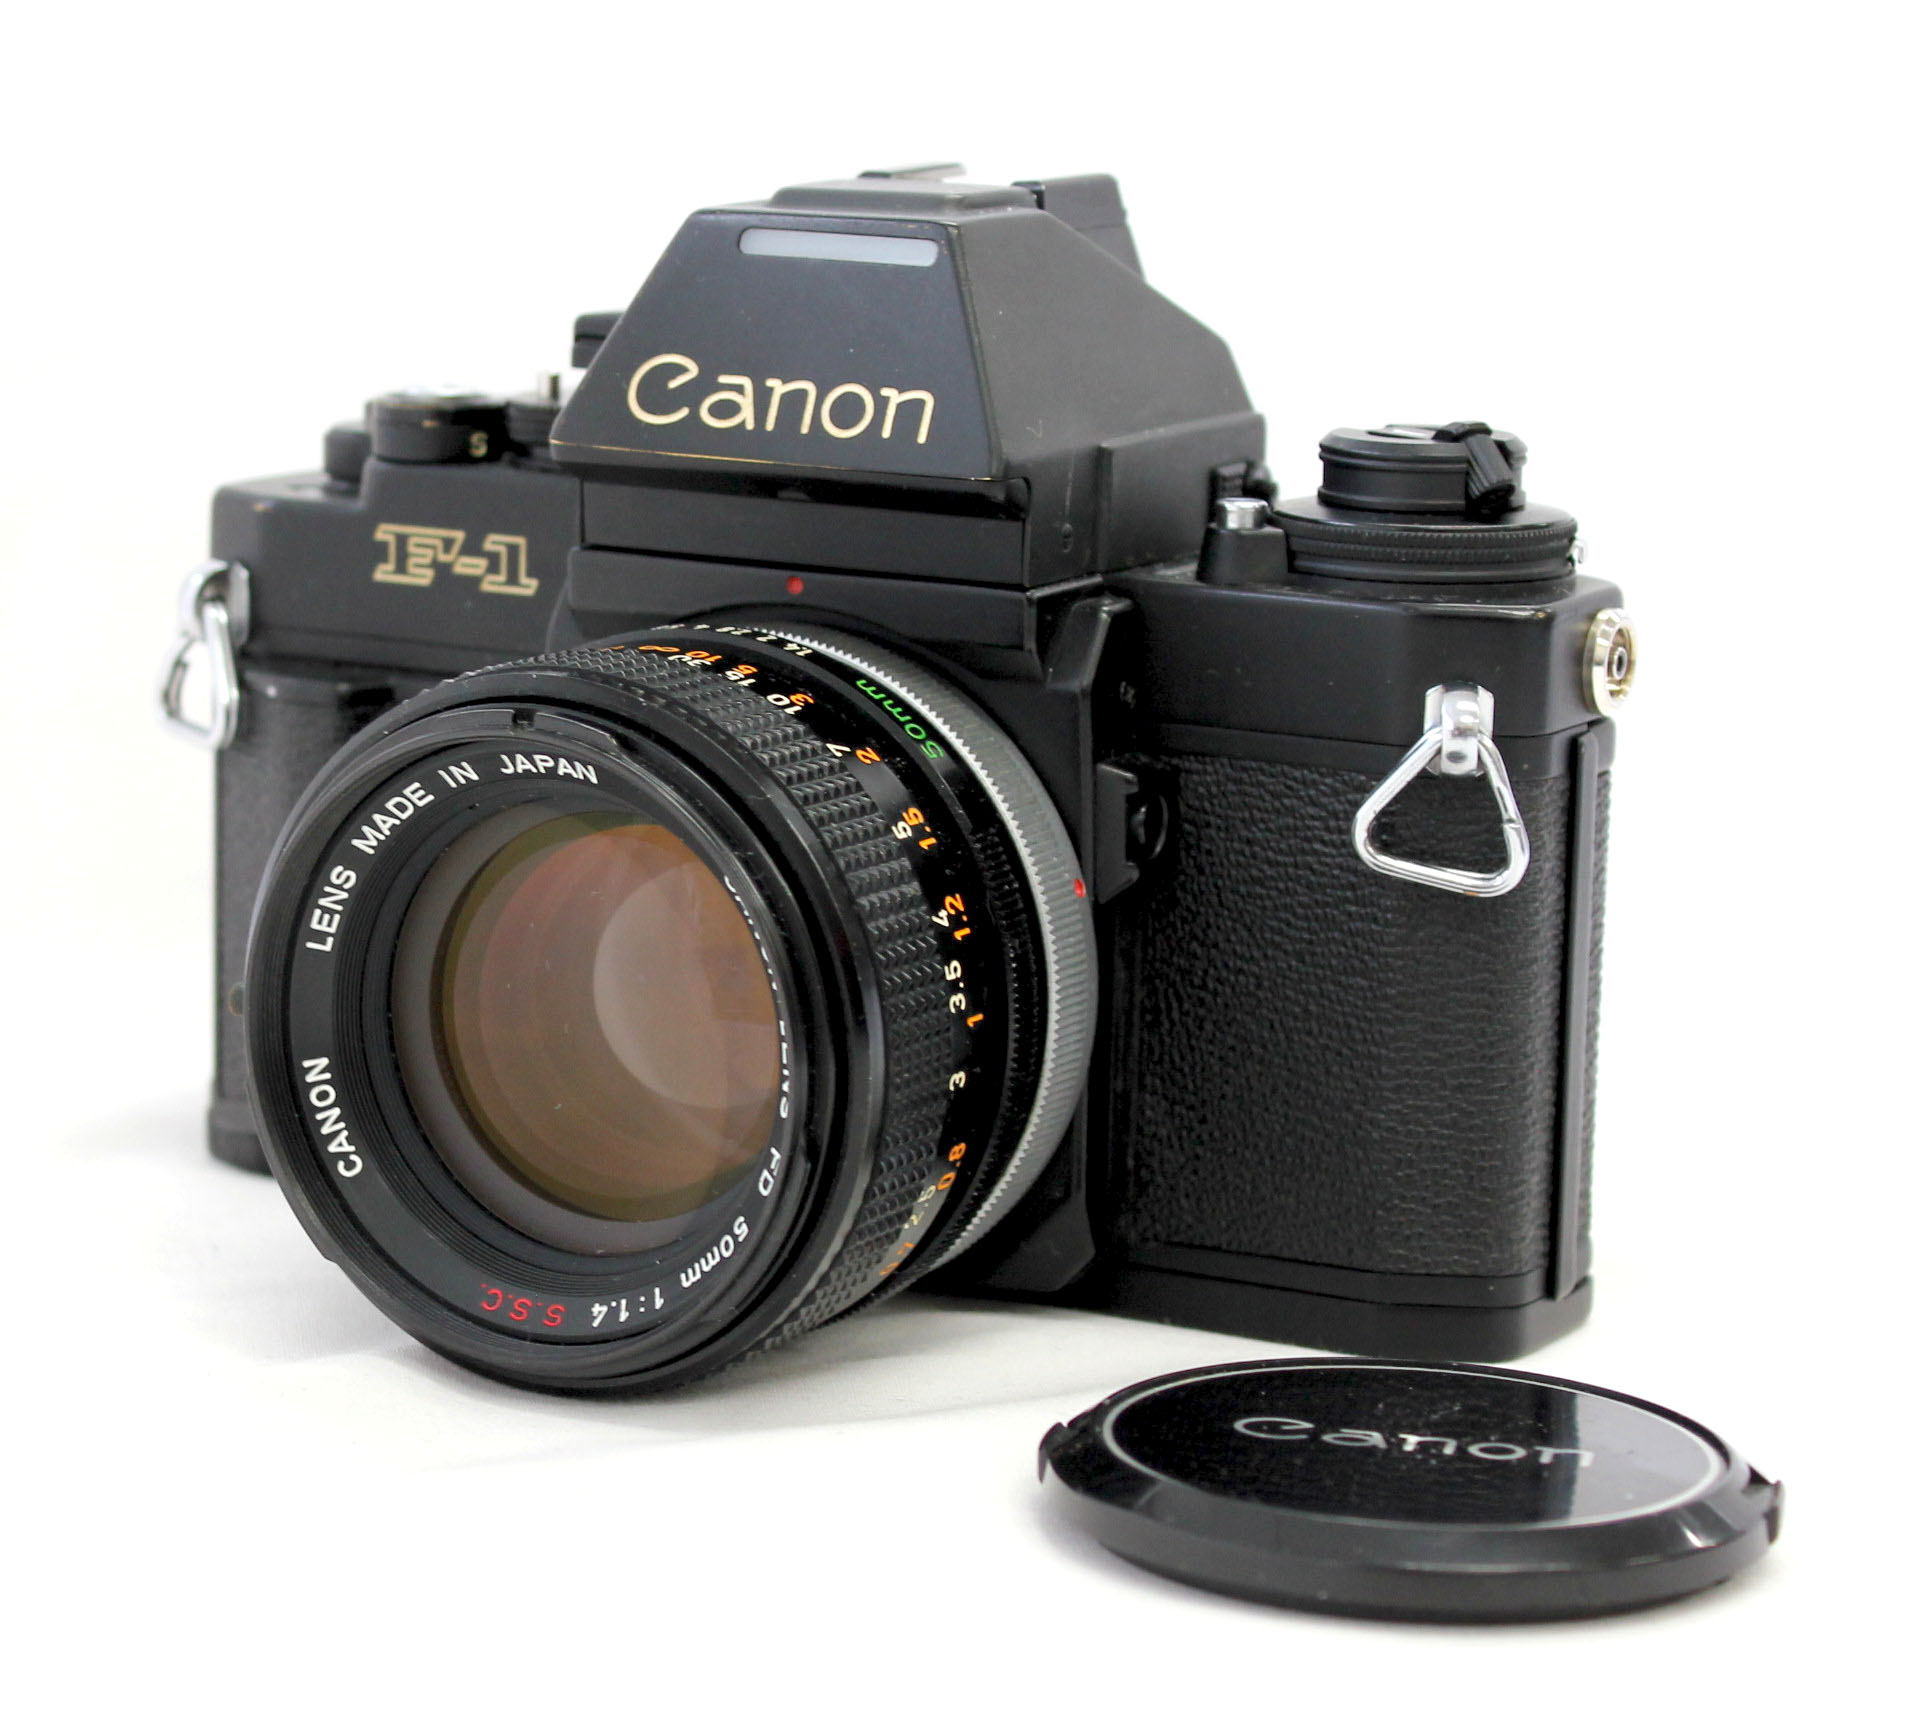  Canon New F-1 AE Finder 35mm SLR Film Camera with FD 50mm F/1.4 S.S.C. Lens from Japan Photo 0